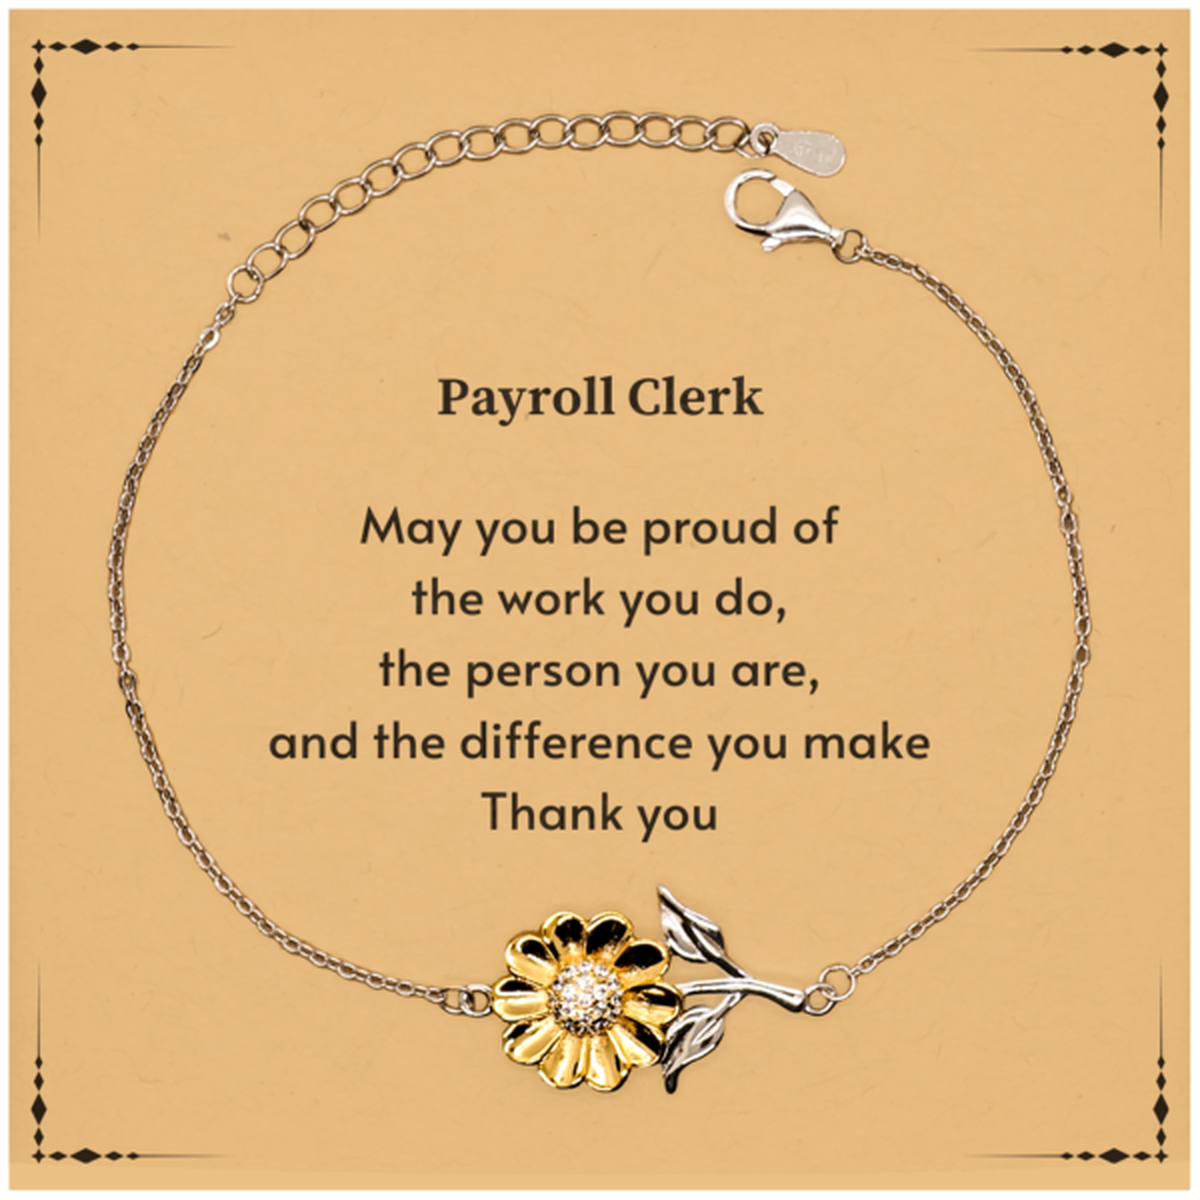 Heartwarming Sunflower Bracelet Retirement Coworkers Gifts for Payroll Clerk, Payroll Clerk May You be proud of the work you do, the person you are Gifts for Boss Men Women Friends